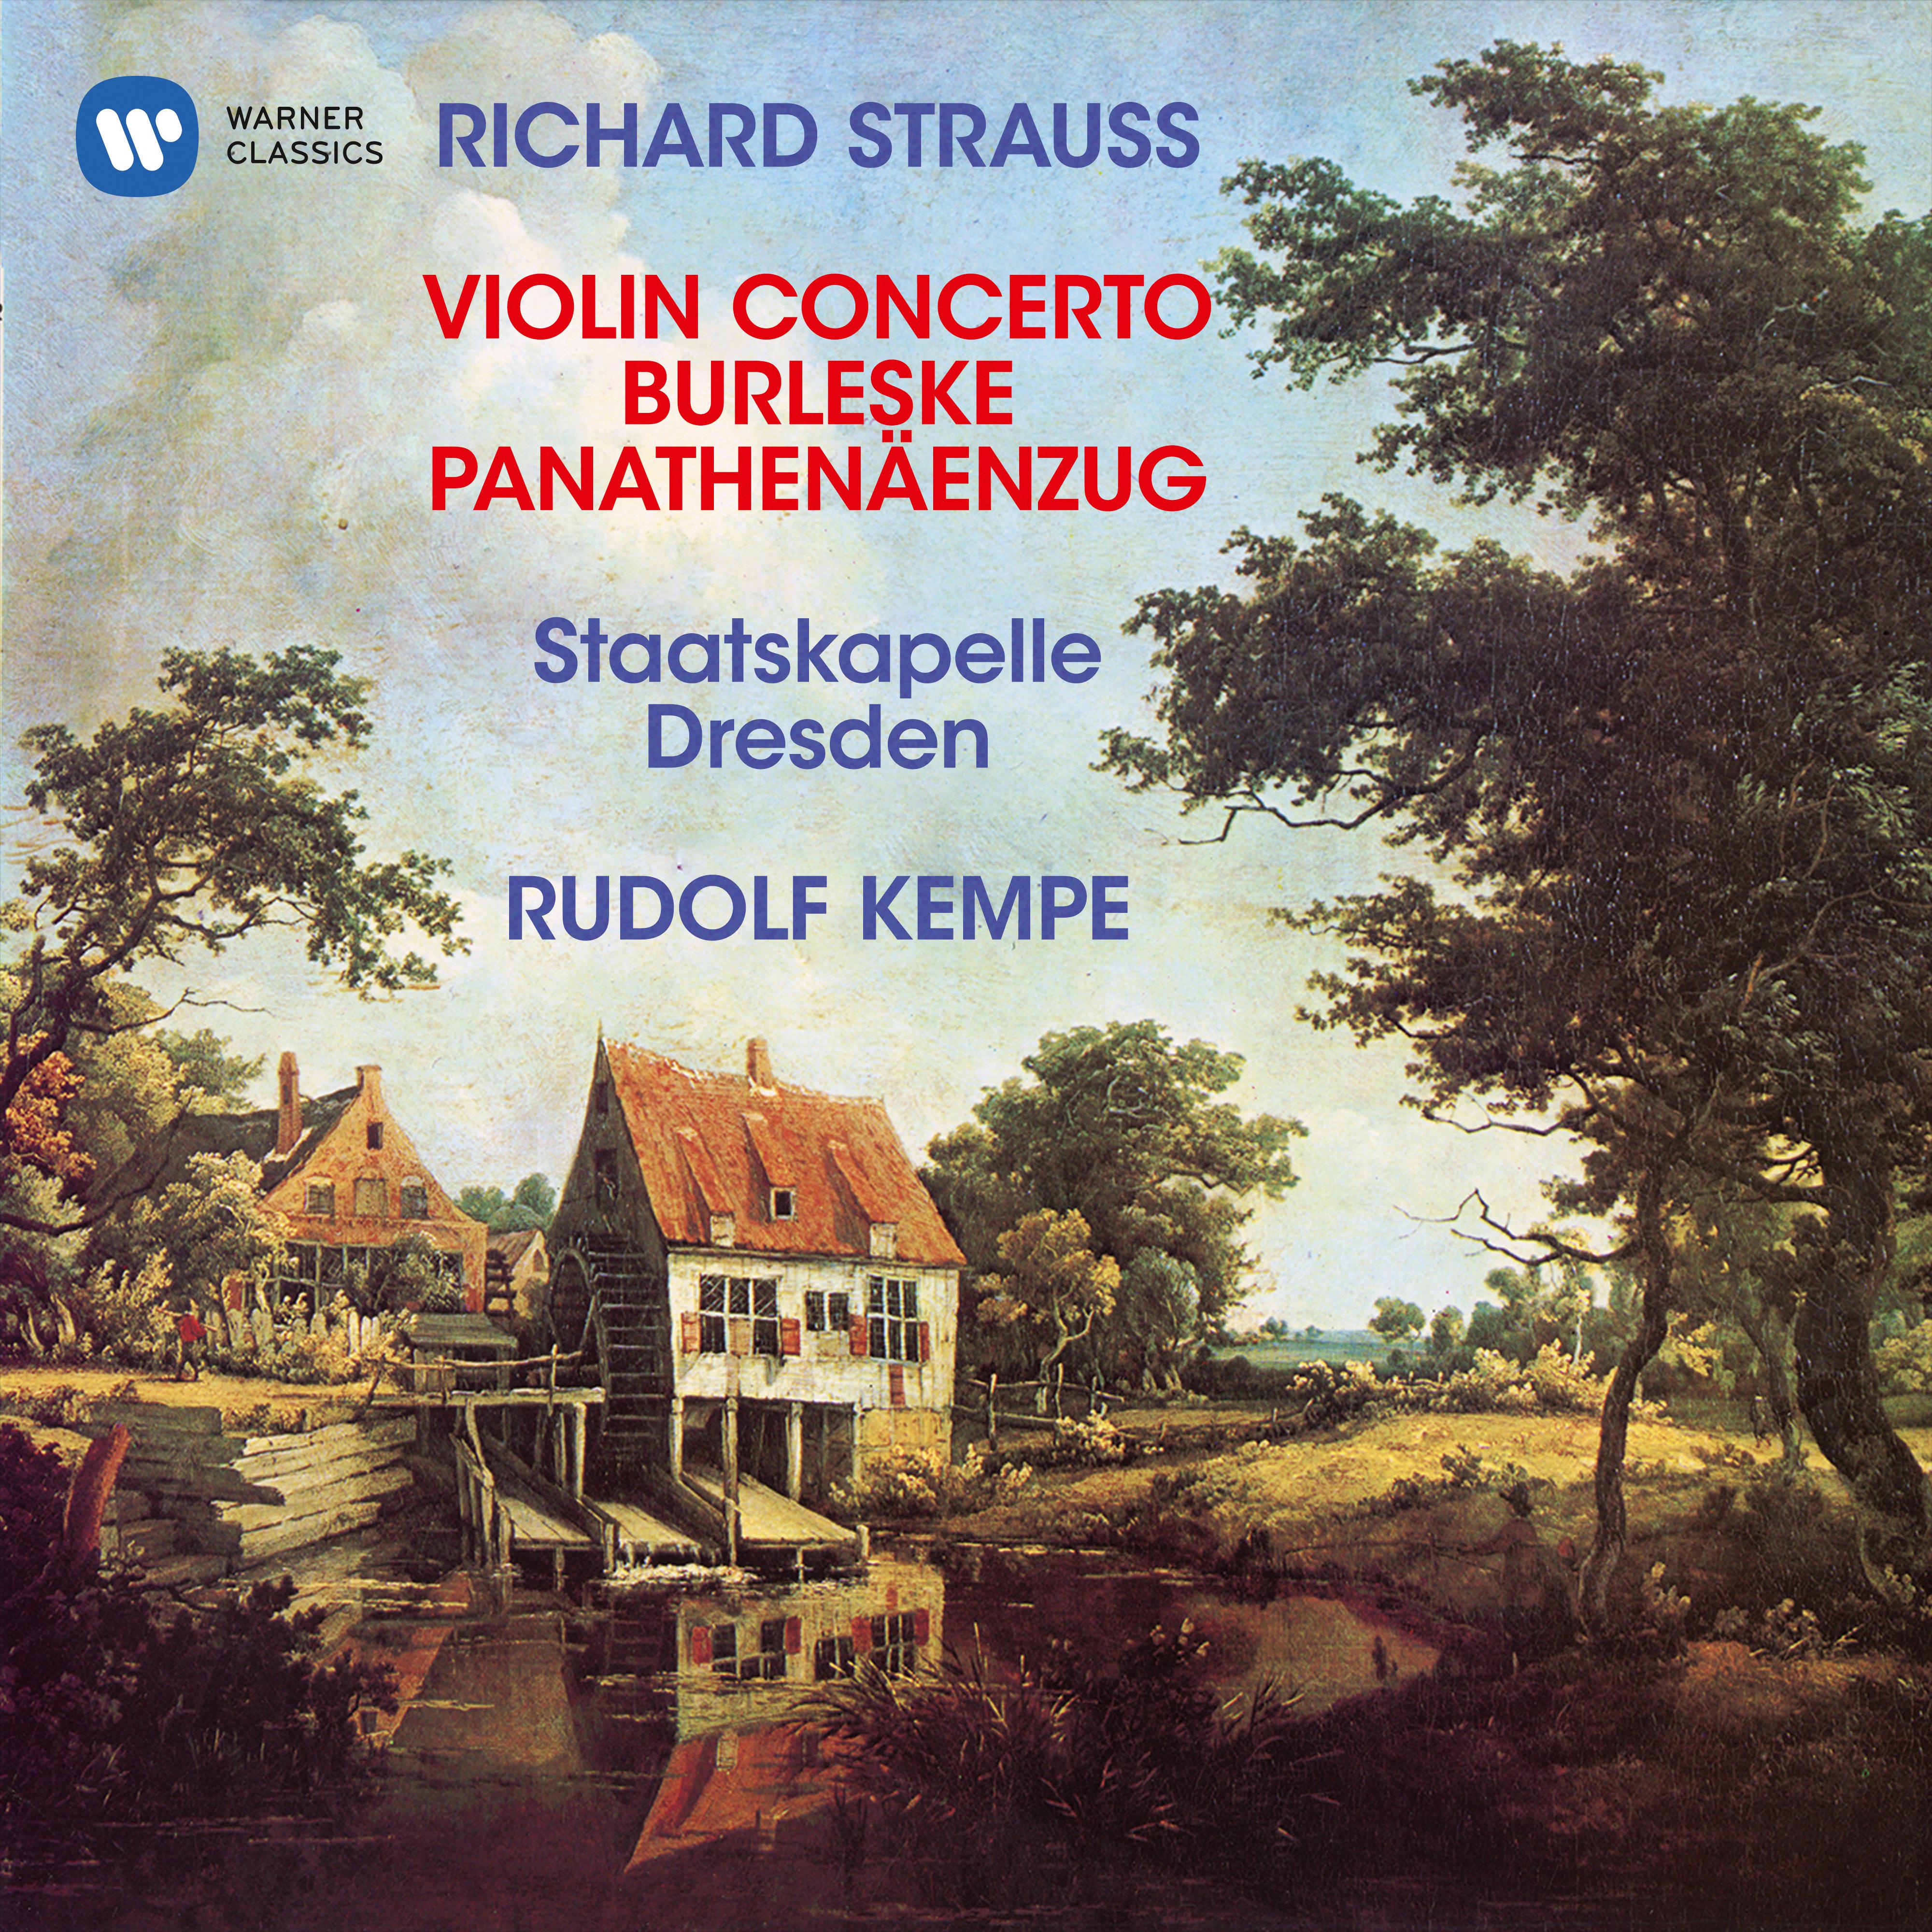 Burleske for Piano and Orchestra in D Minor, TrV 145